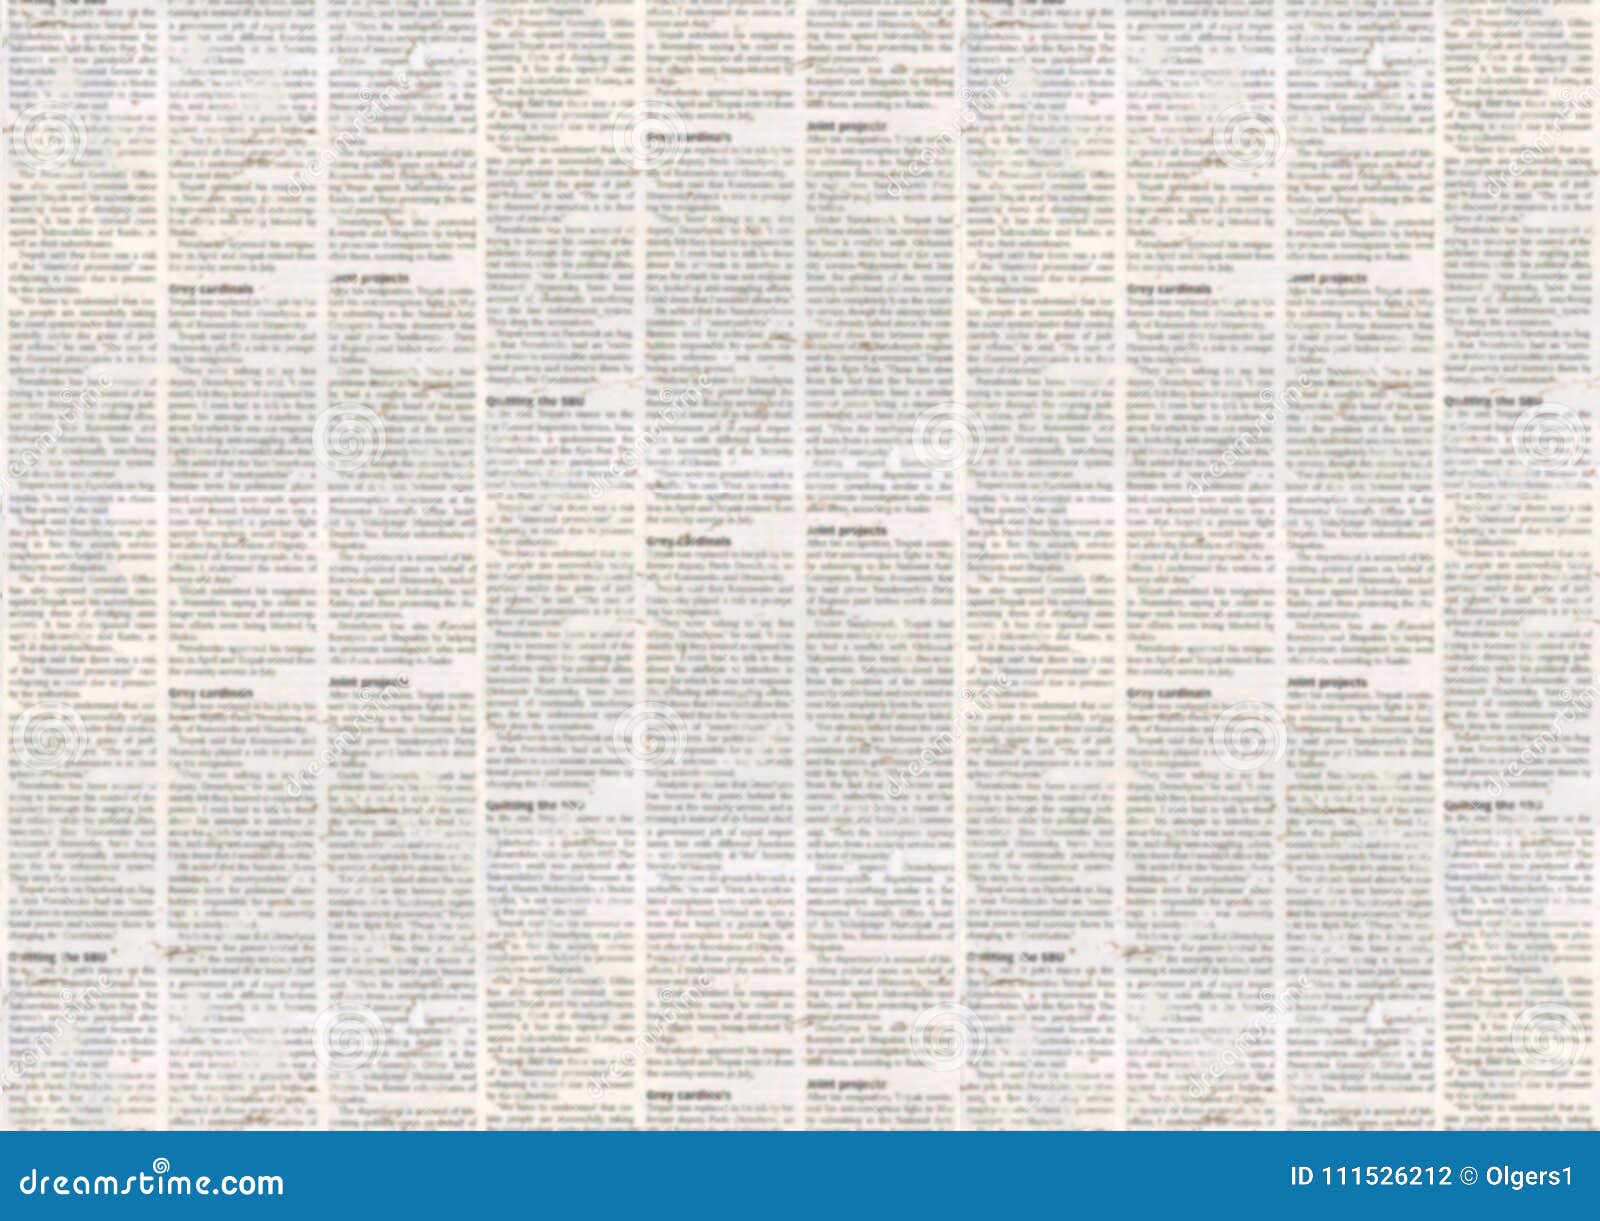 newspapers, newspaper texture, background, download photos  Newspaper  background, Newspaper textures, Printed backgrounds